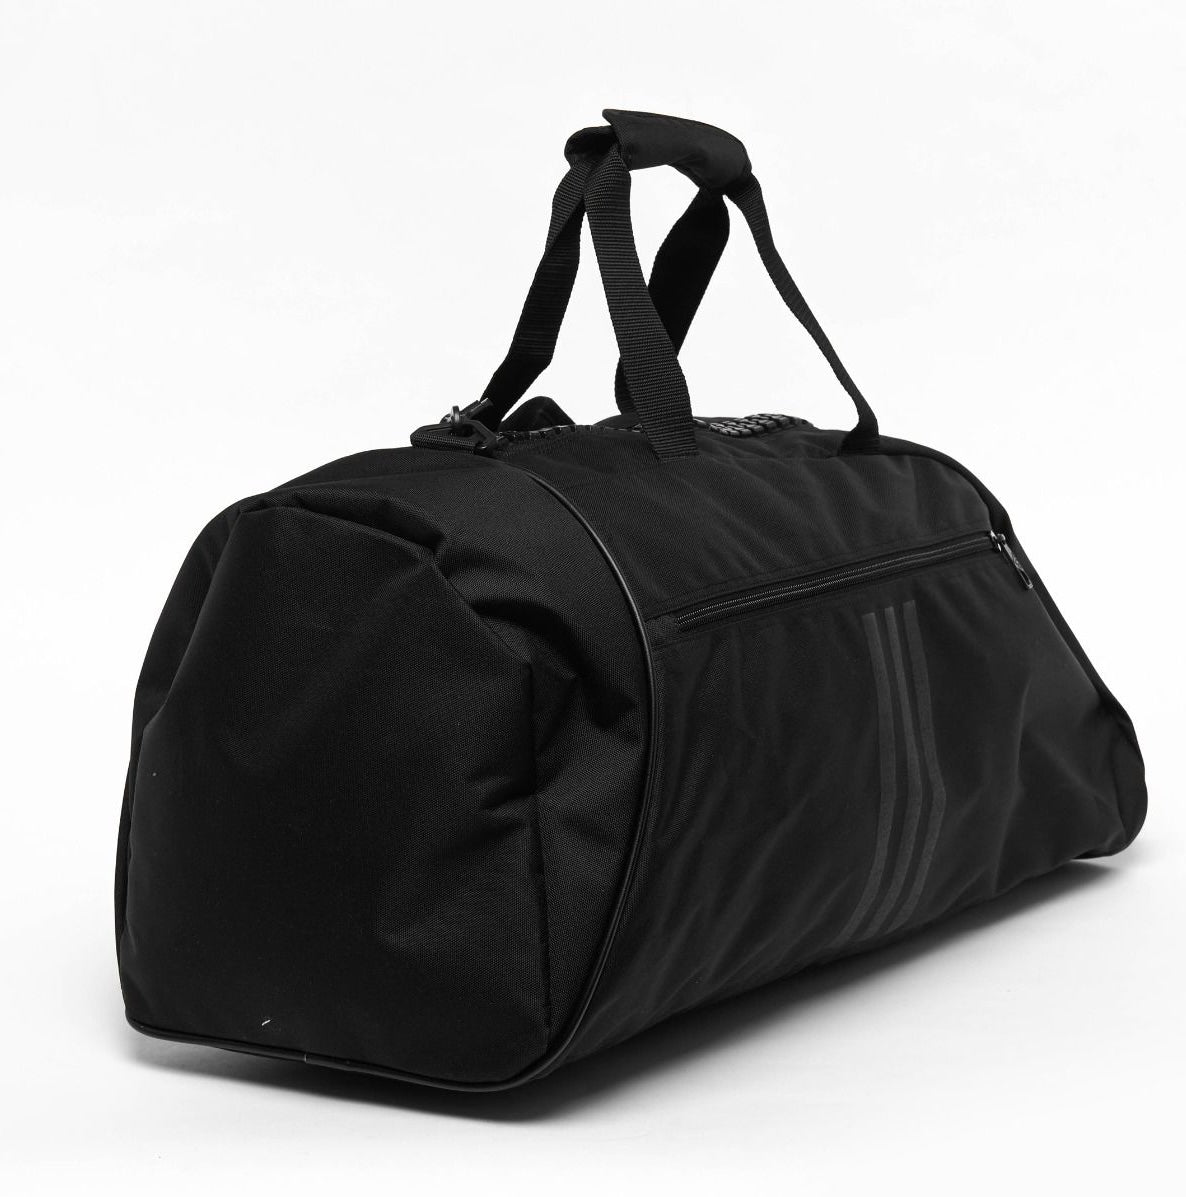 ADIDAS BOXING 2 IN 1 HOLDALL